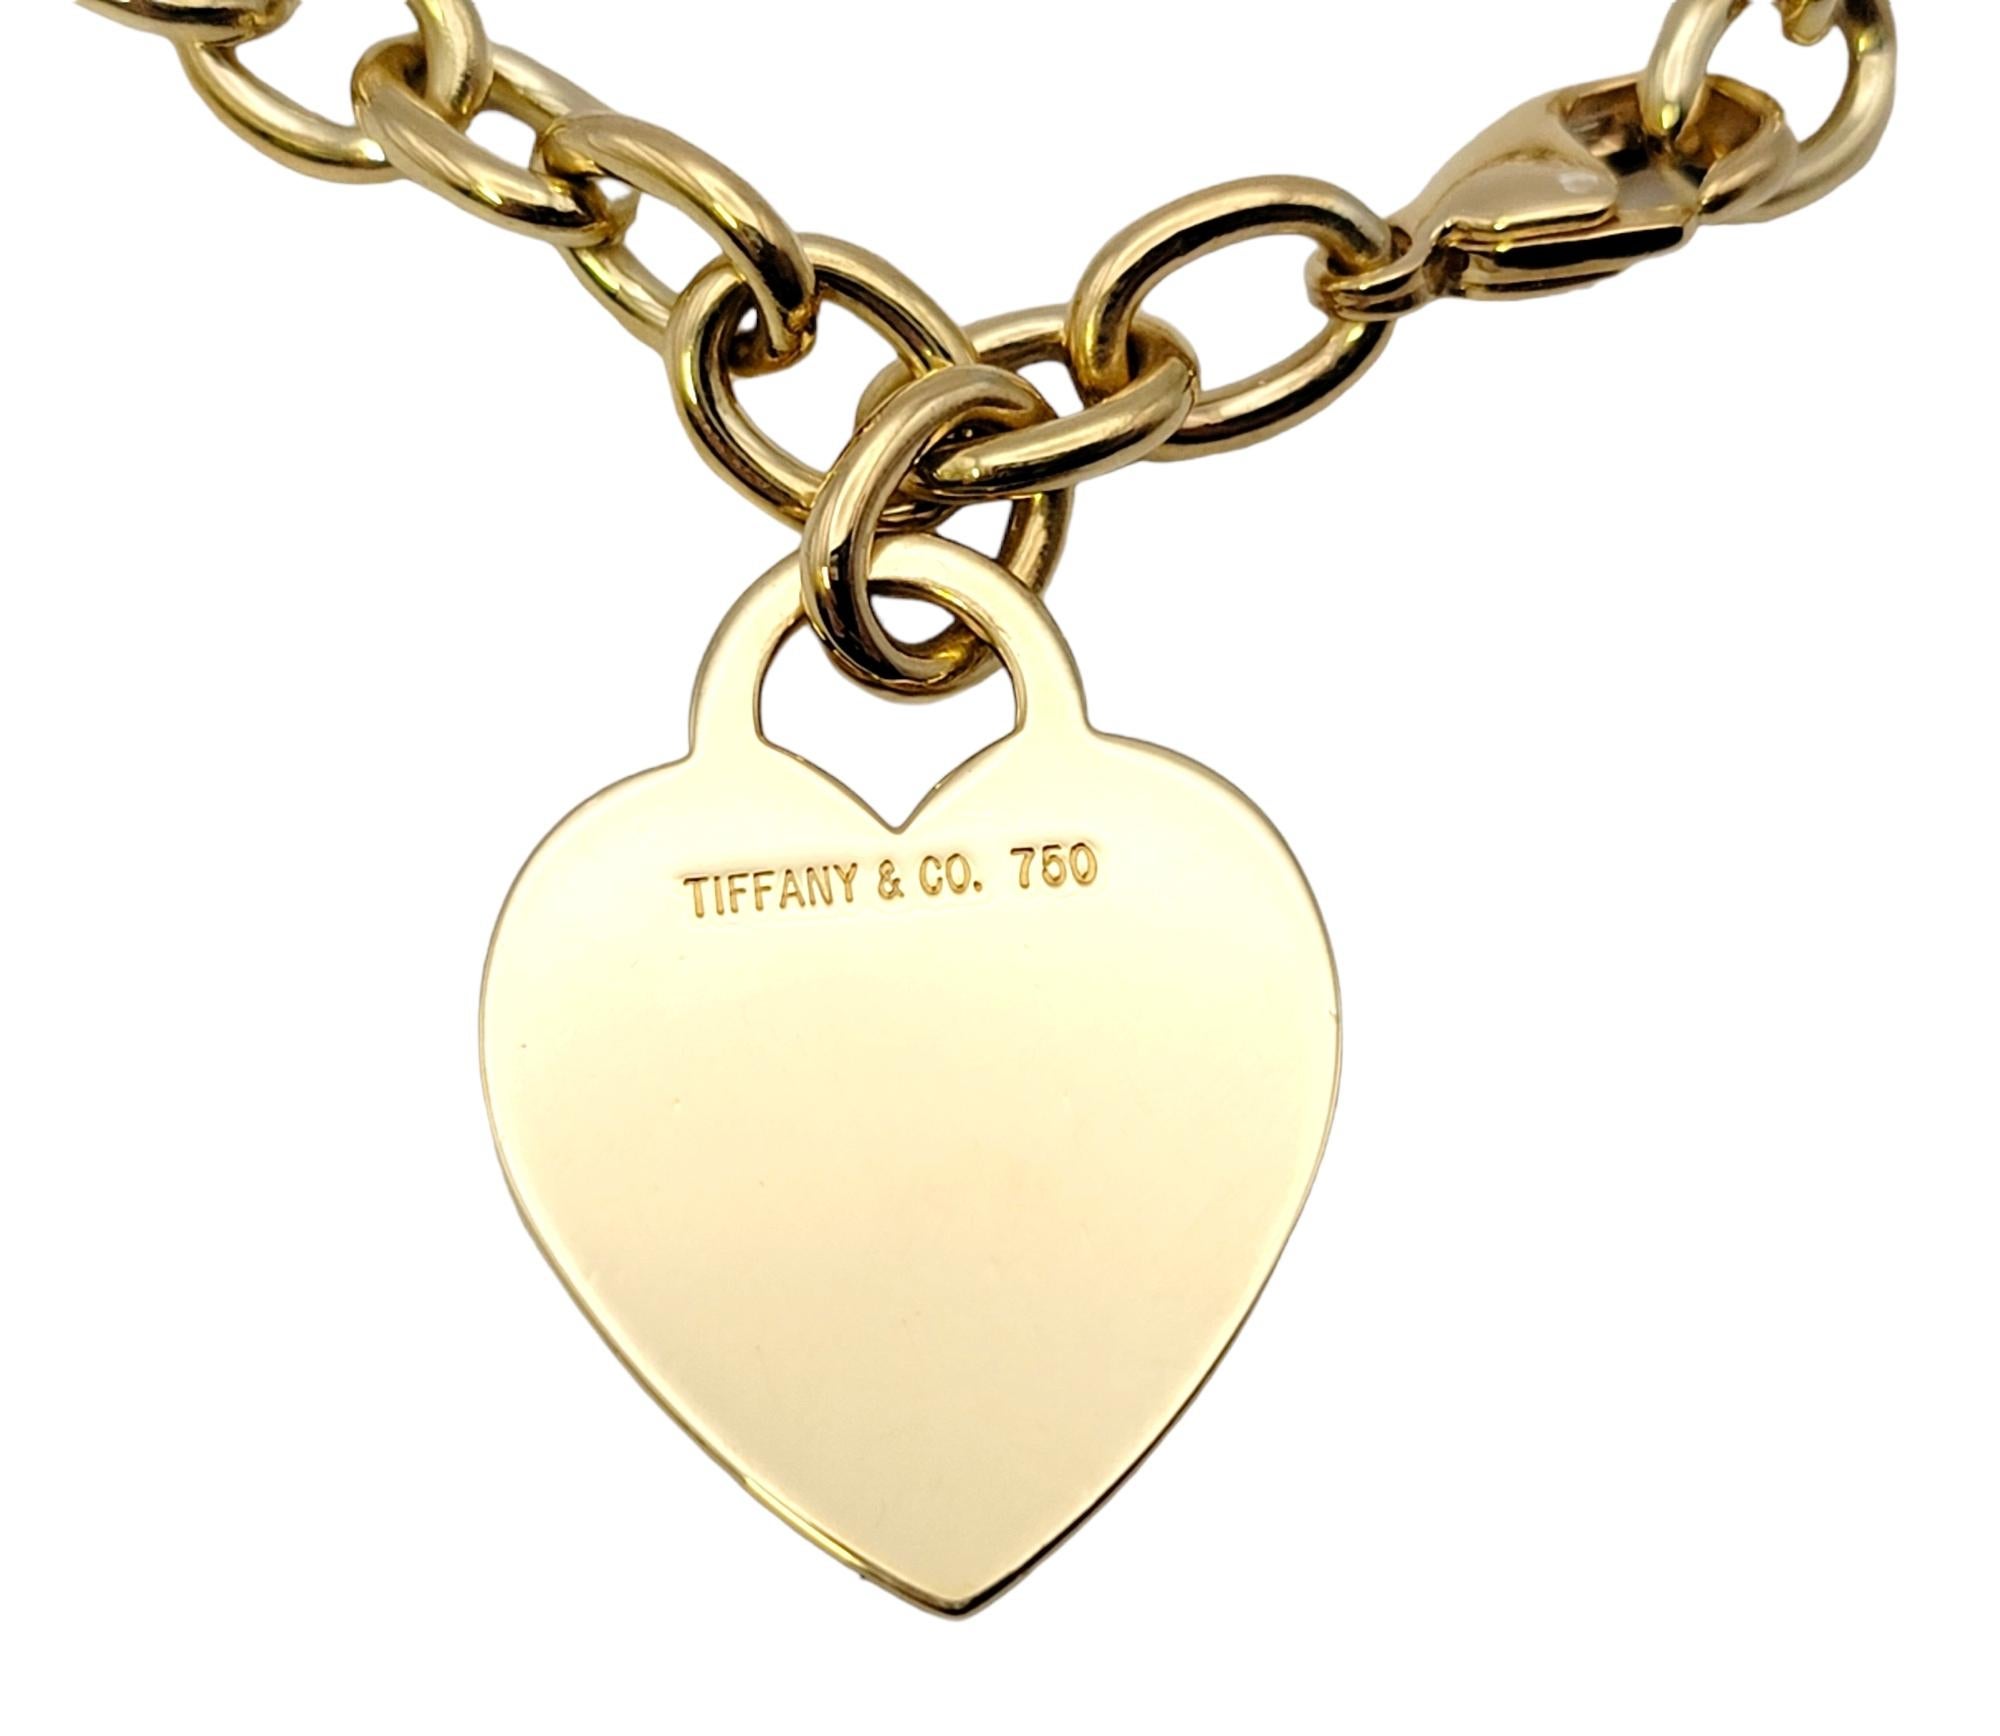 Contemporary Tiffany & Co. Heart Tag Chain Link Bracelet in Polished 18 Karat Yellow Gold For Sale